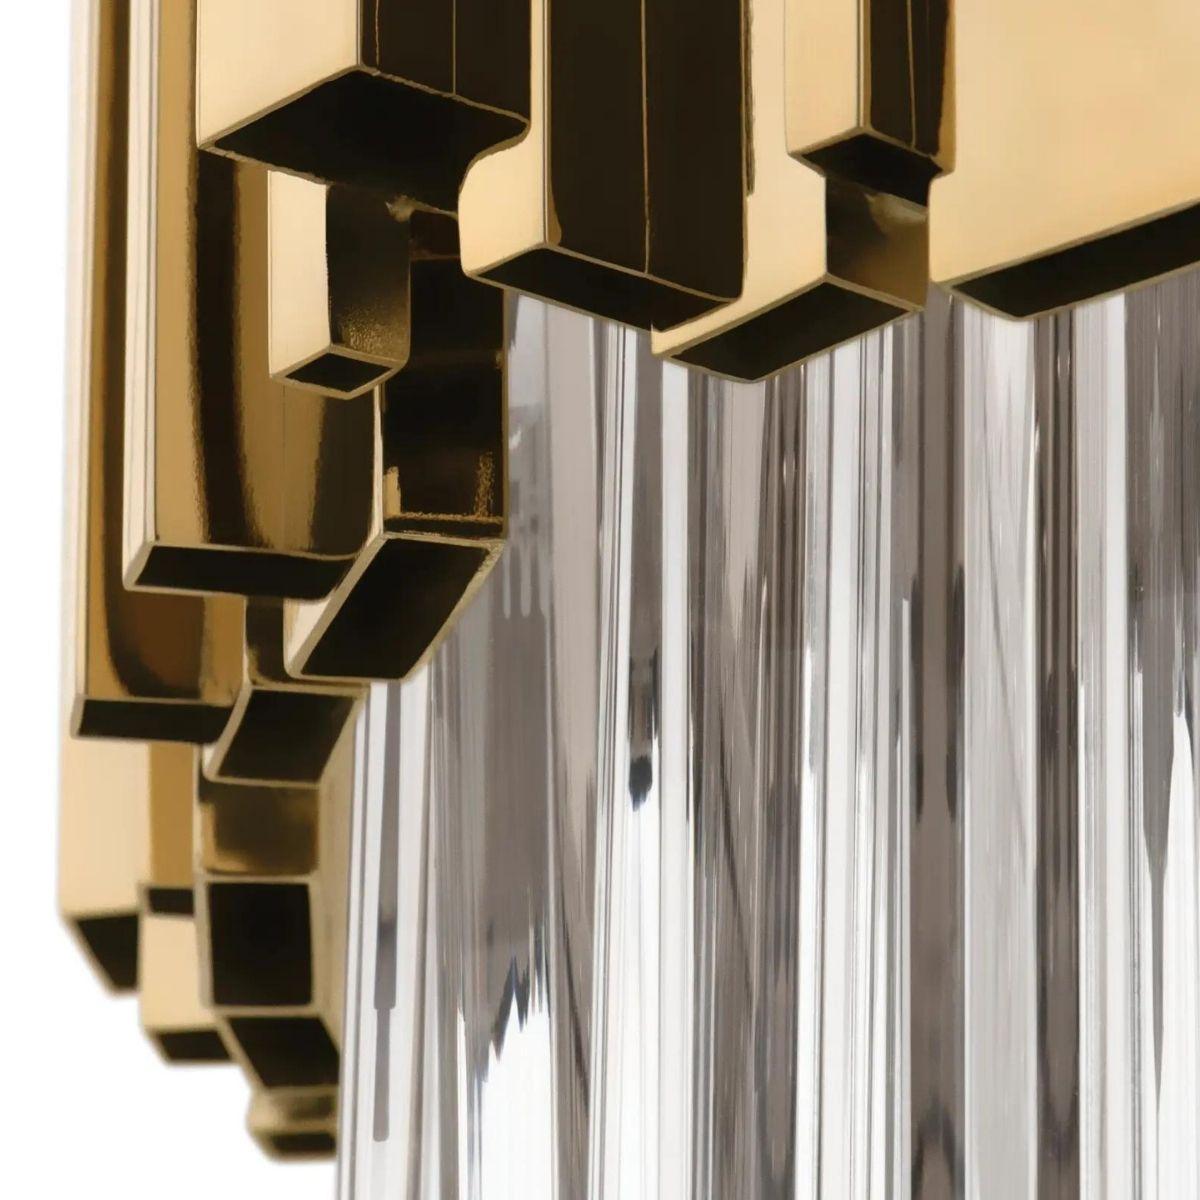 Modern Empire Crystal Glass Suspension Light by Luxxu

Modern Empire Crystal Glass Suspension Light by Luxxu is an exclusive fixture that is made with one elegant layer of gold-plated brass and clear crystal glass. Empire Suspension Lamp gets its